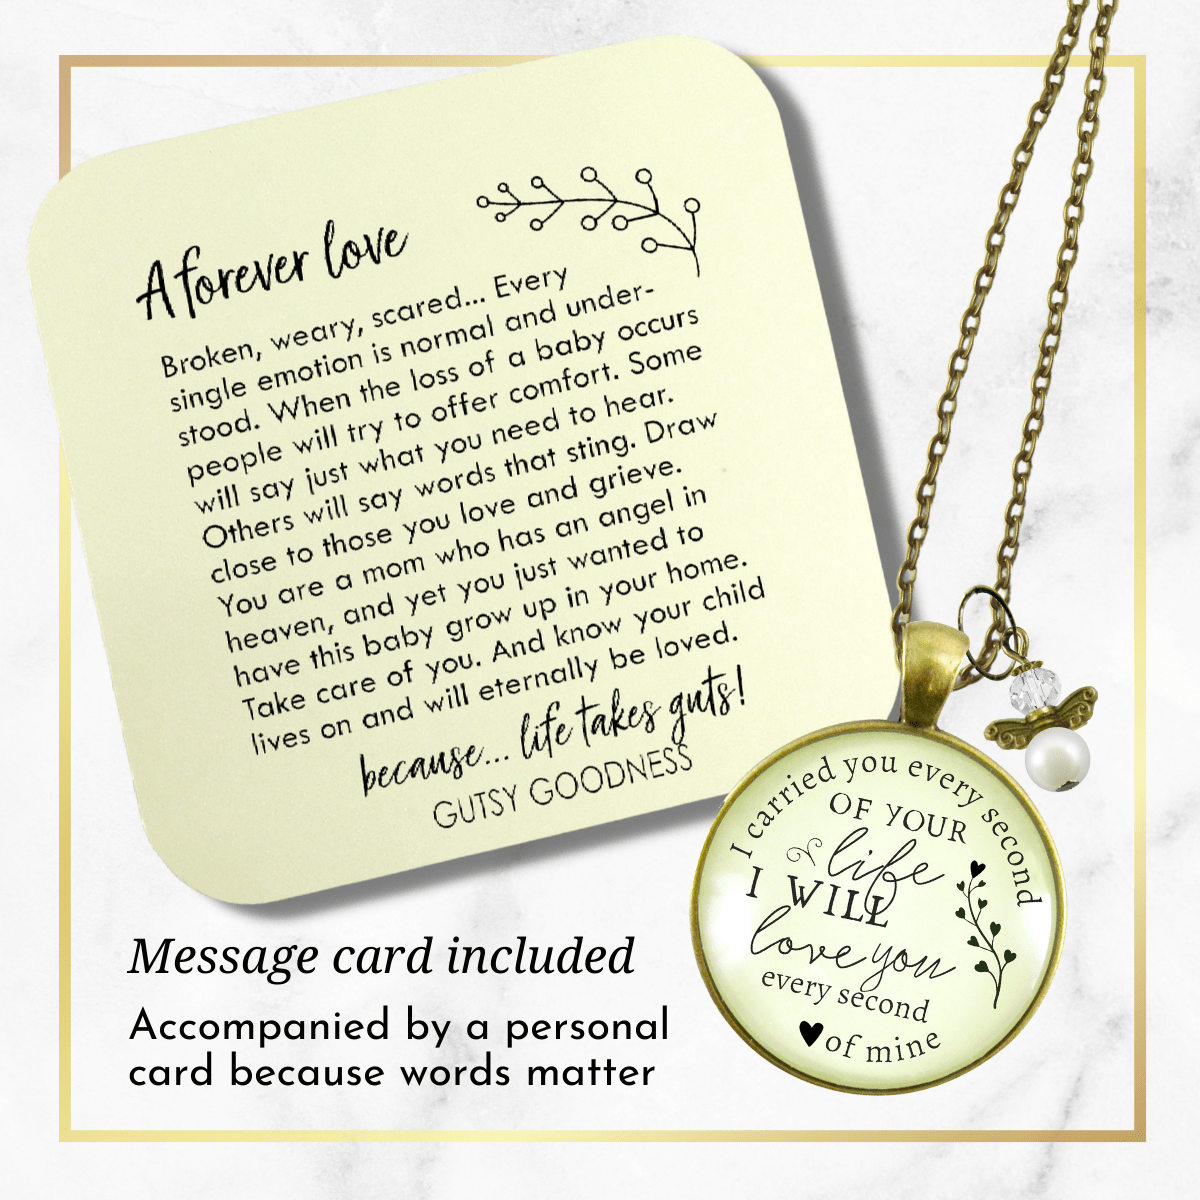 Gutsy Goodness I Carried You Miscarriage Necklace Baby Loss Angel Charm Jewelry Memorial Gift - Gutsy Goodness Handmade Jewelry;I Carried You Miscarriage Necklace Baby Loss Angel Charm Jewelry Memorial Gift - Gutsy Goodness Handmade Jewelry Gifts